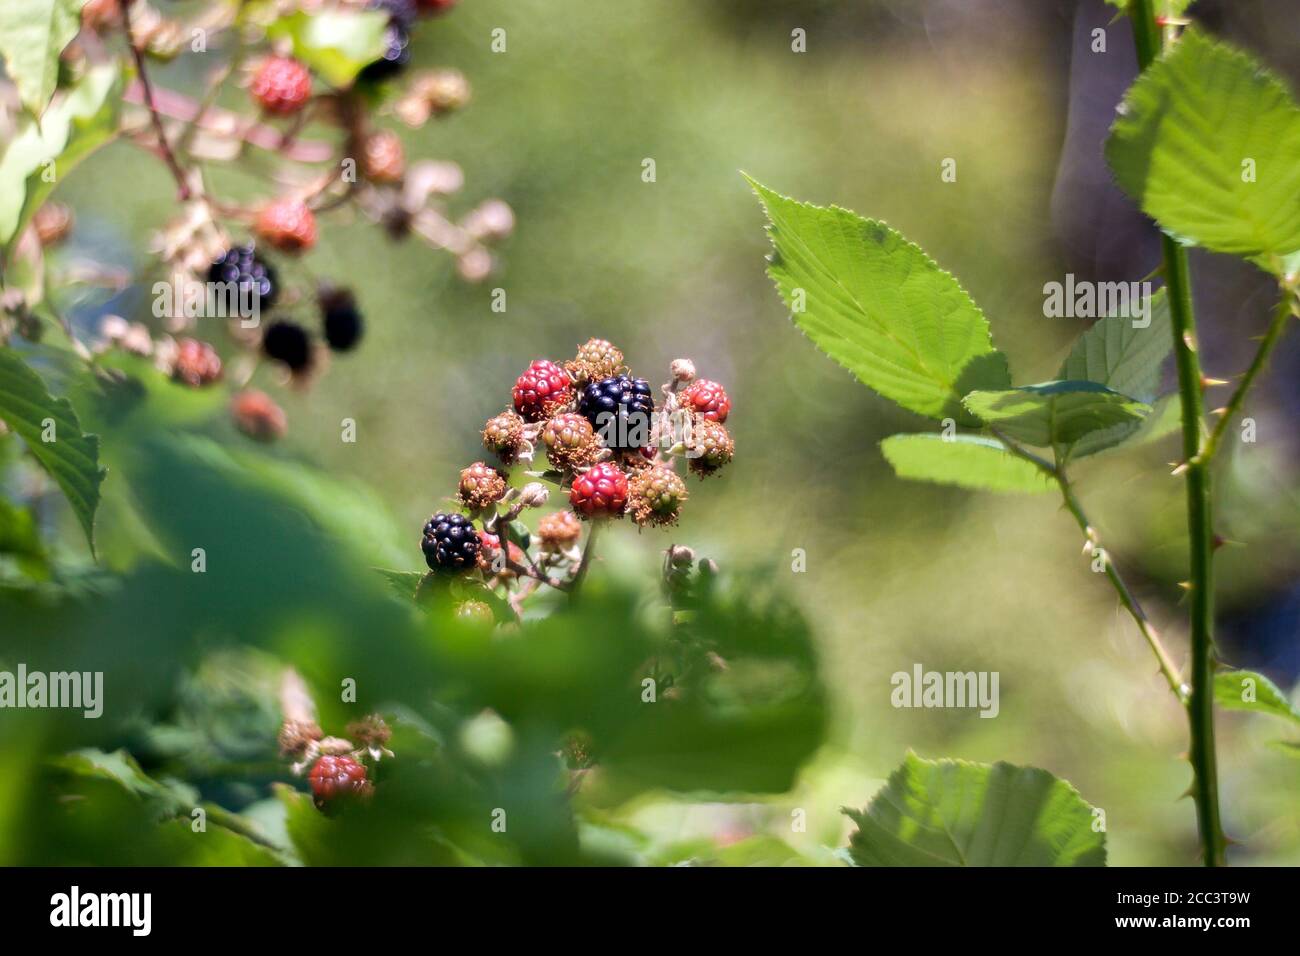 Blackberries isolated from background and very unusual bokeh - swirly bubbles. Image captured with vintage lens - Meyer-Optic Gorlitz Primoplan 58 mm. Stock Photo